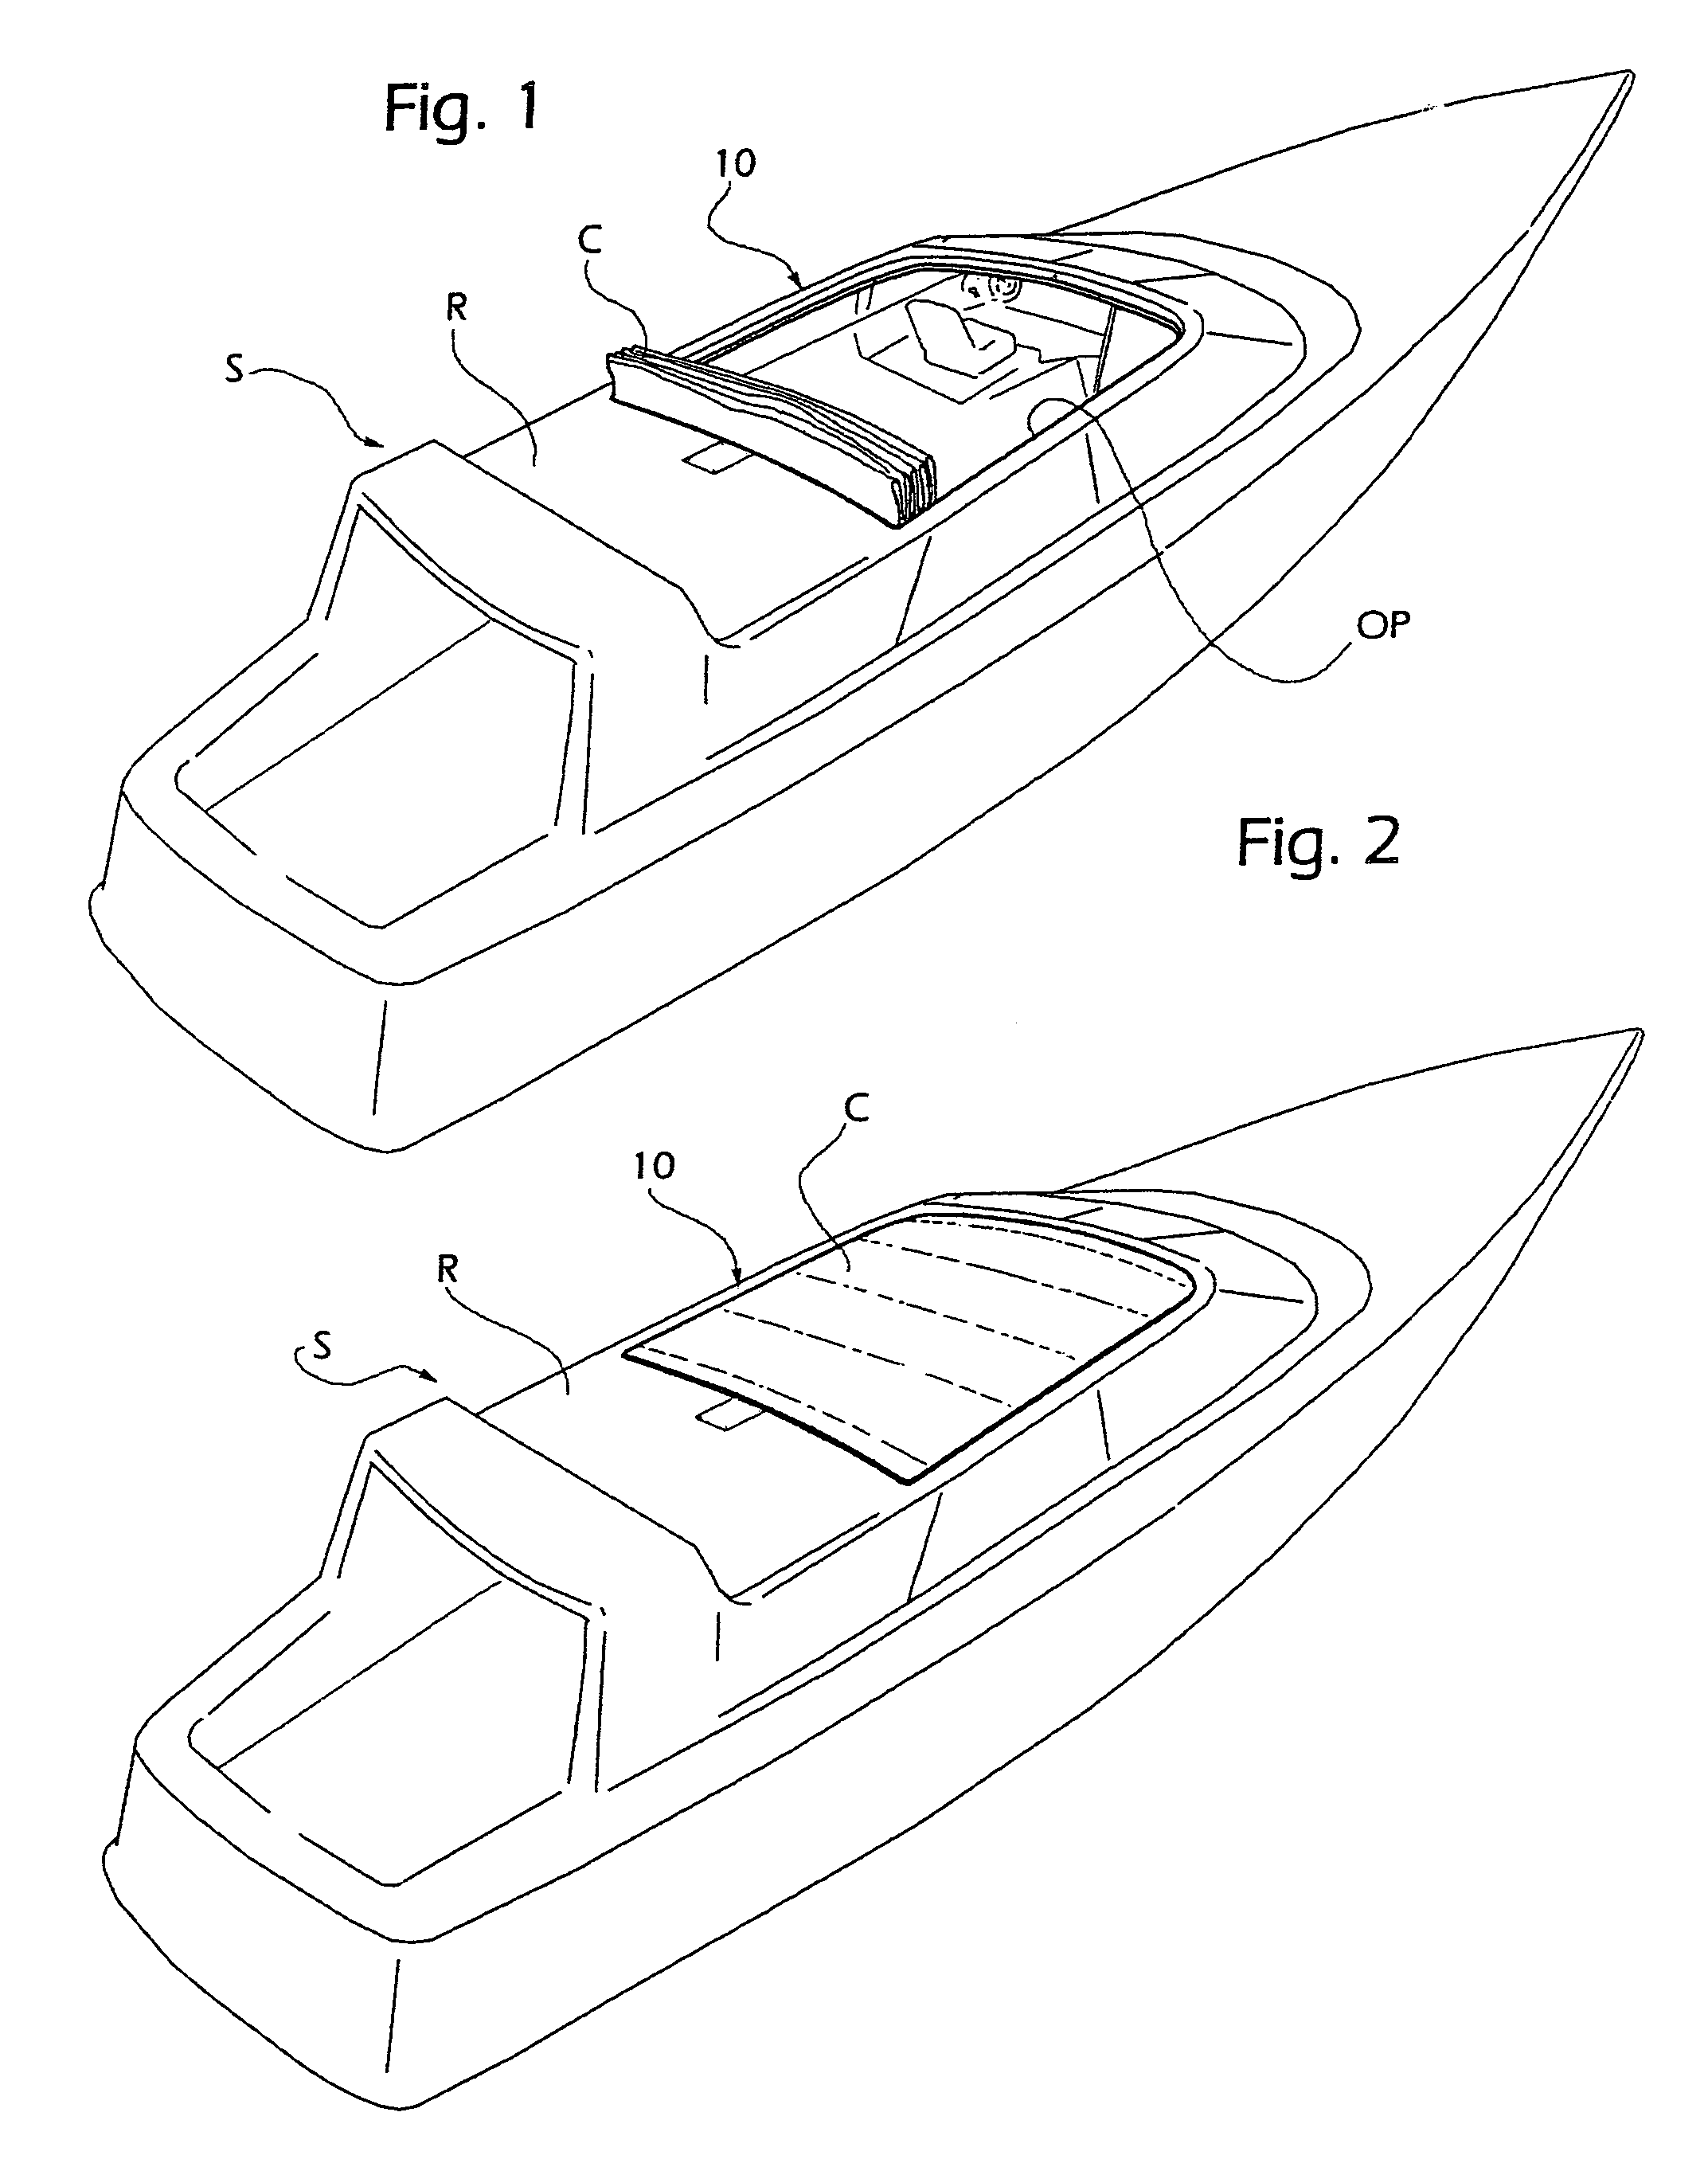 Modular movement support system for an openable roof for a vehicle, in particular for a boat